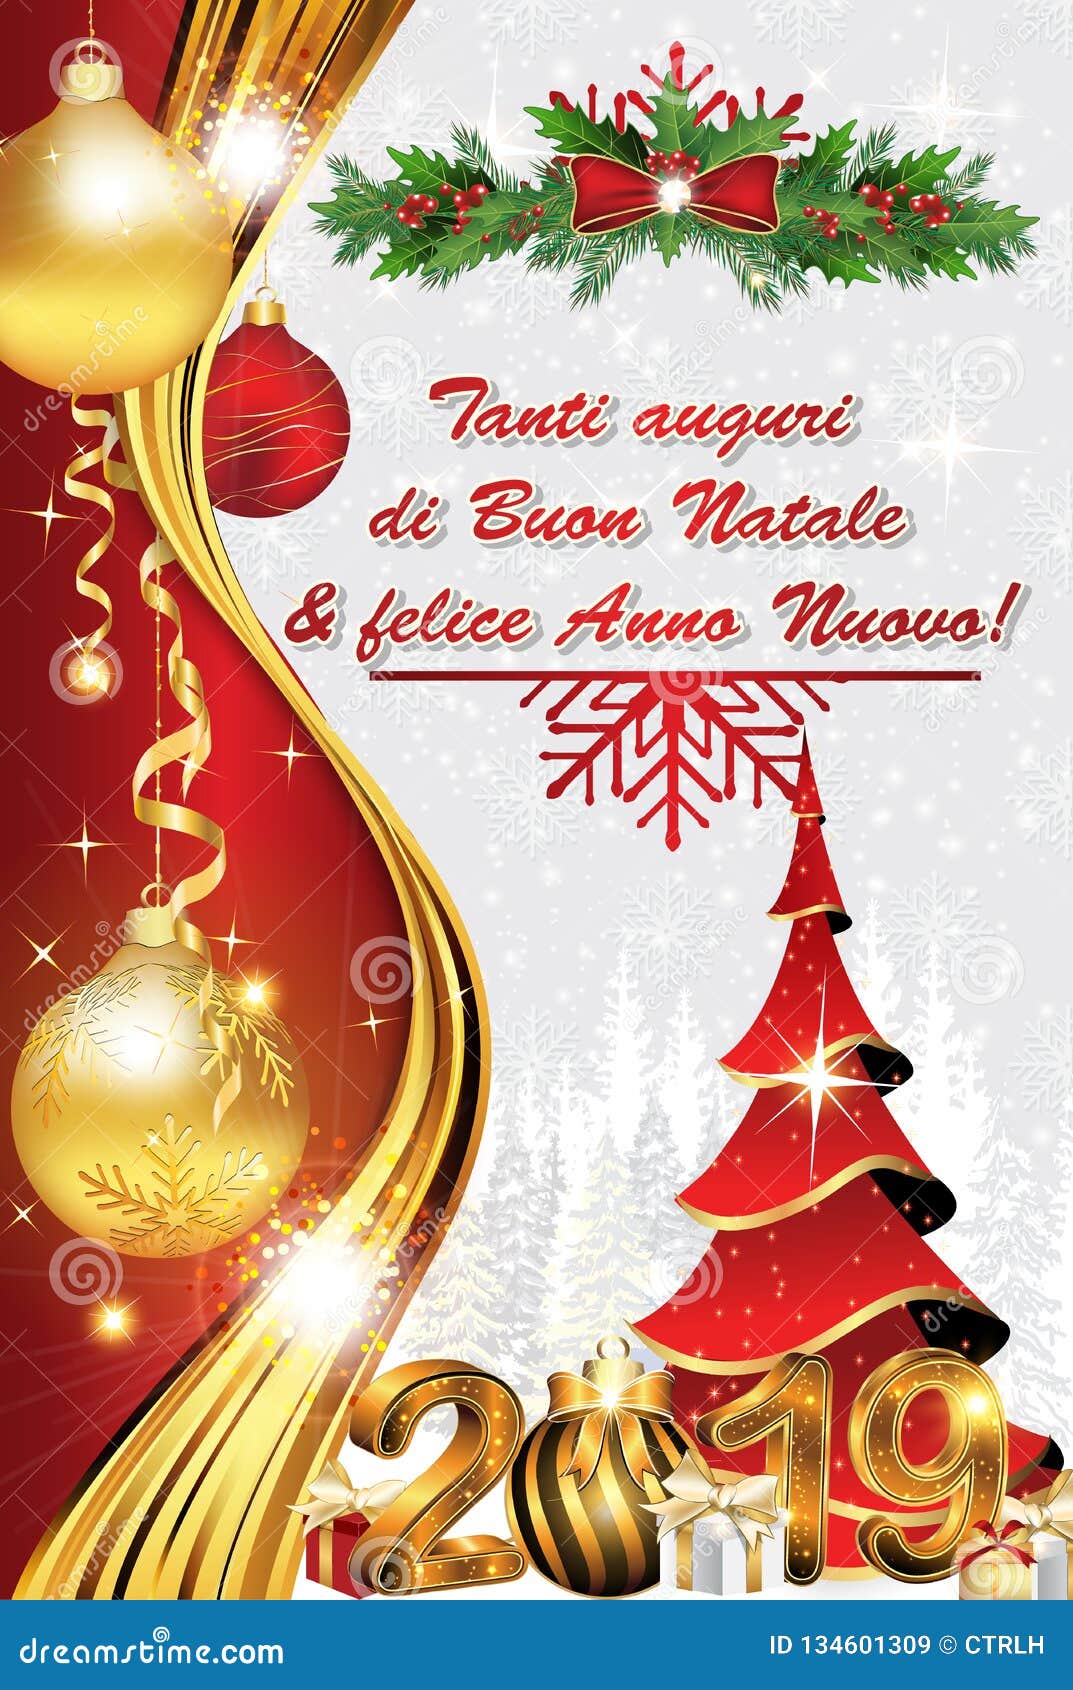 Auguri Di Buon Natale Translation.Italian Greeting Card With Classic Design Merry Christmas And Happy New Year Stock Illustration Illustration Of Companies Jingle 134601309